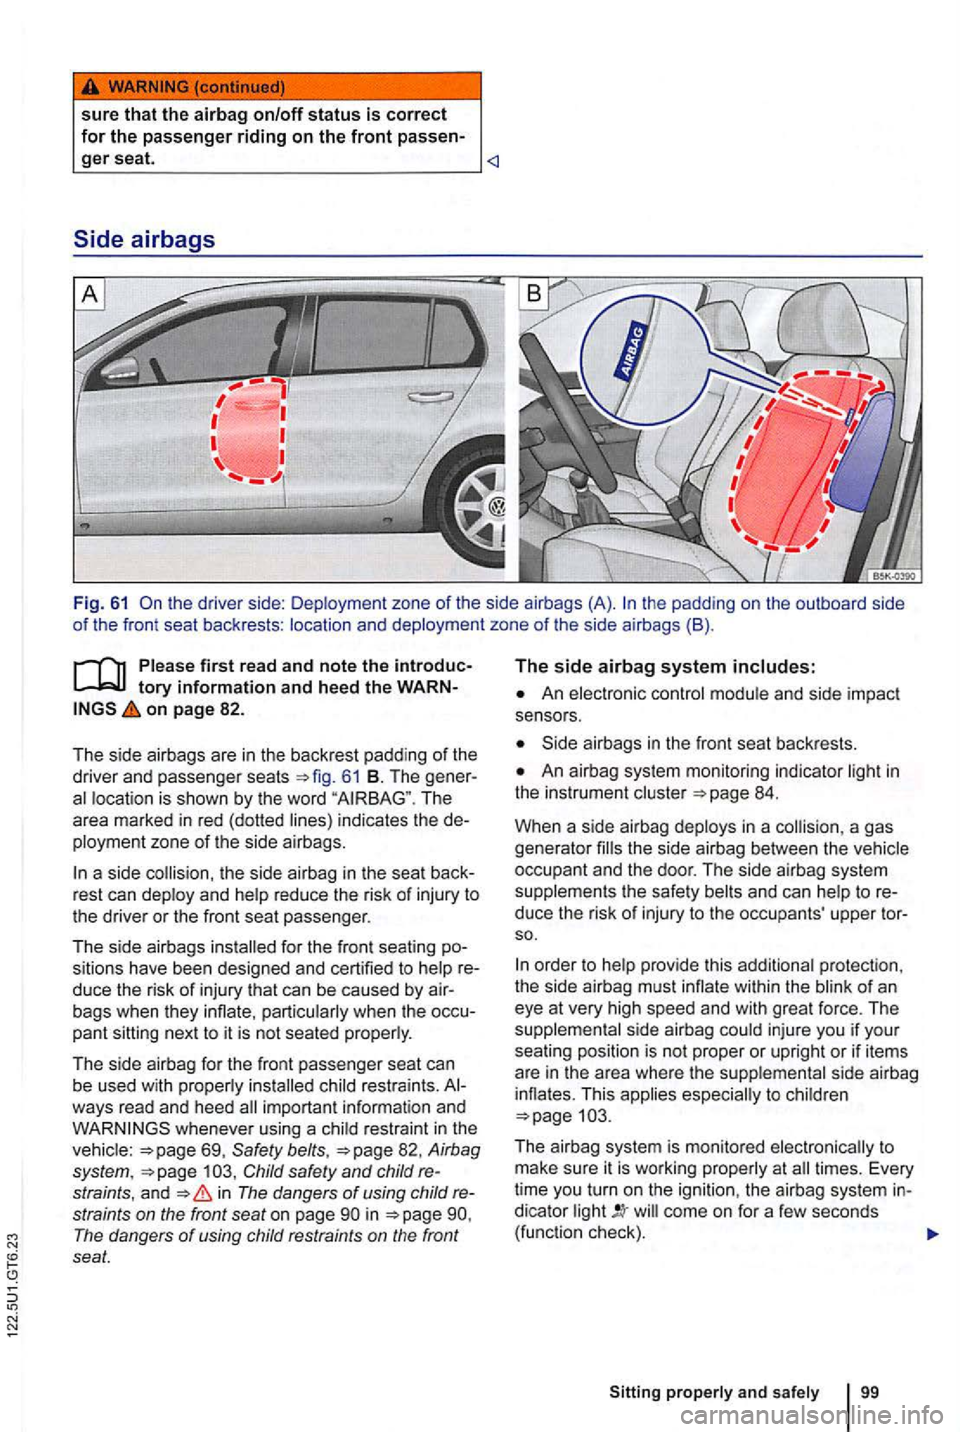 VOLKSWAGEN GOLF 2009  Owners Manual sure that the airbag on/off status is correct for the passenger riding on the front passen-ger seat. <l 
Side  airbags 
Fig.  61 the  padding  on the  outboard  side of the fro nt  seat  backrests : l